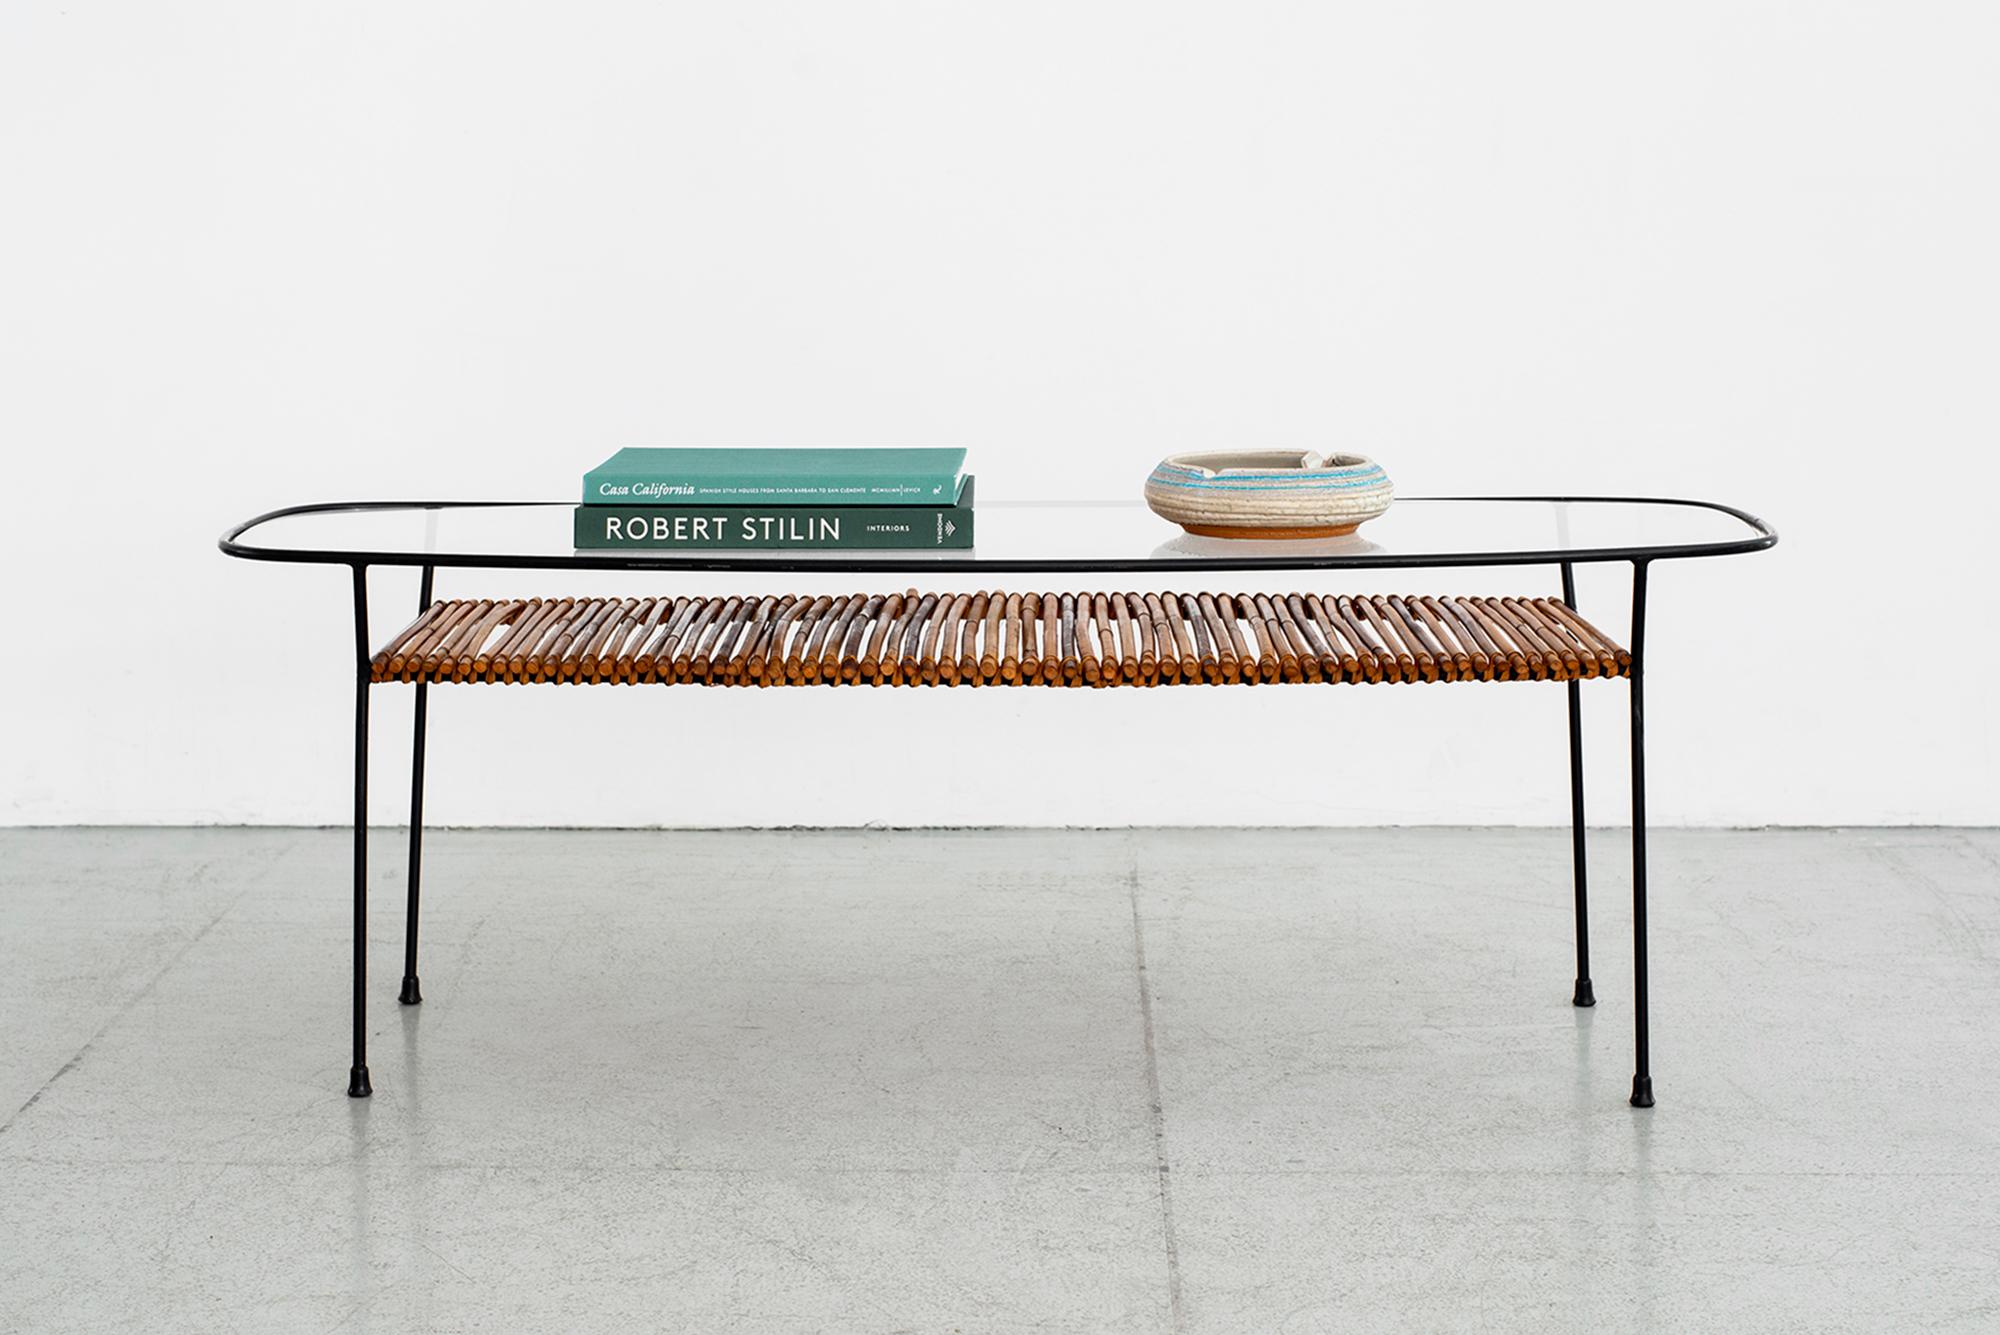 1960s Italian iron and bamboo coffee table with glass top, iron frame and bamboo shelf.
Oblong shape, and impressive in scale.